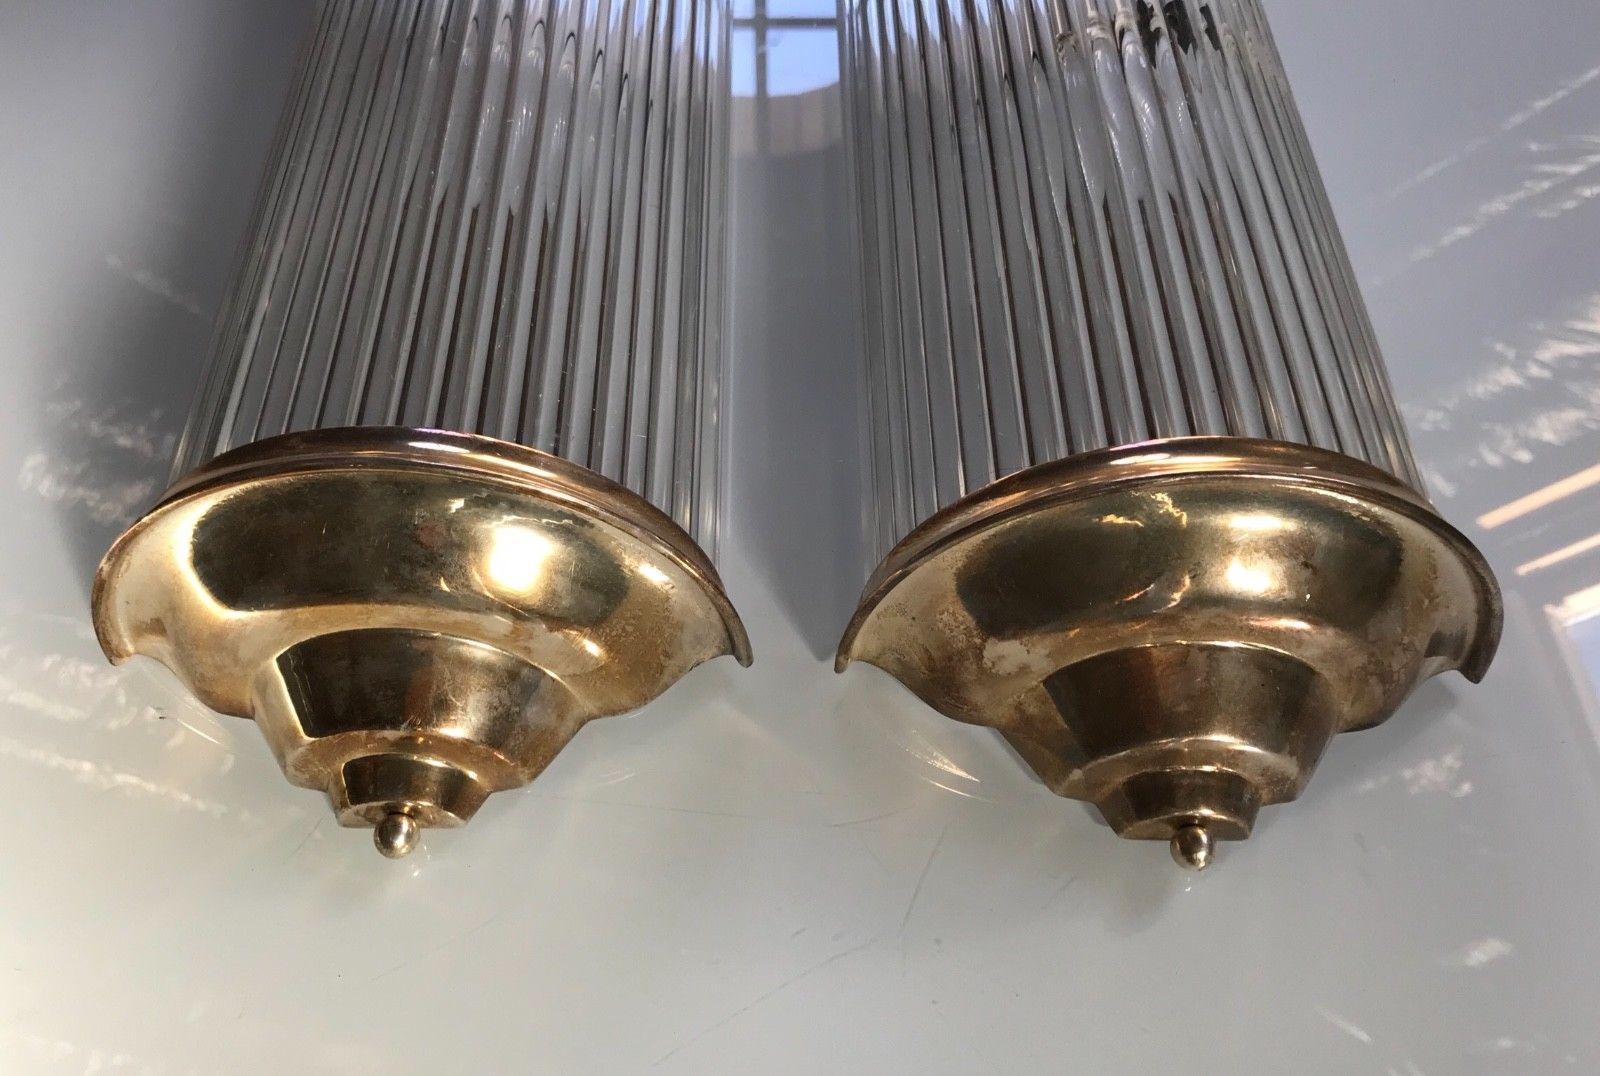 Pair of French Art Deco modernist tubular sconces by Petitot. Having long solid clear glass tubular rods mounted in cast brass frames. The sconces can be hung horizontal or vertical to meet your decor needs. Has been rewired for American use with